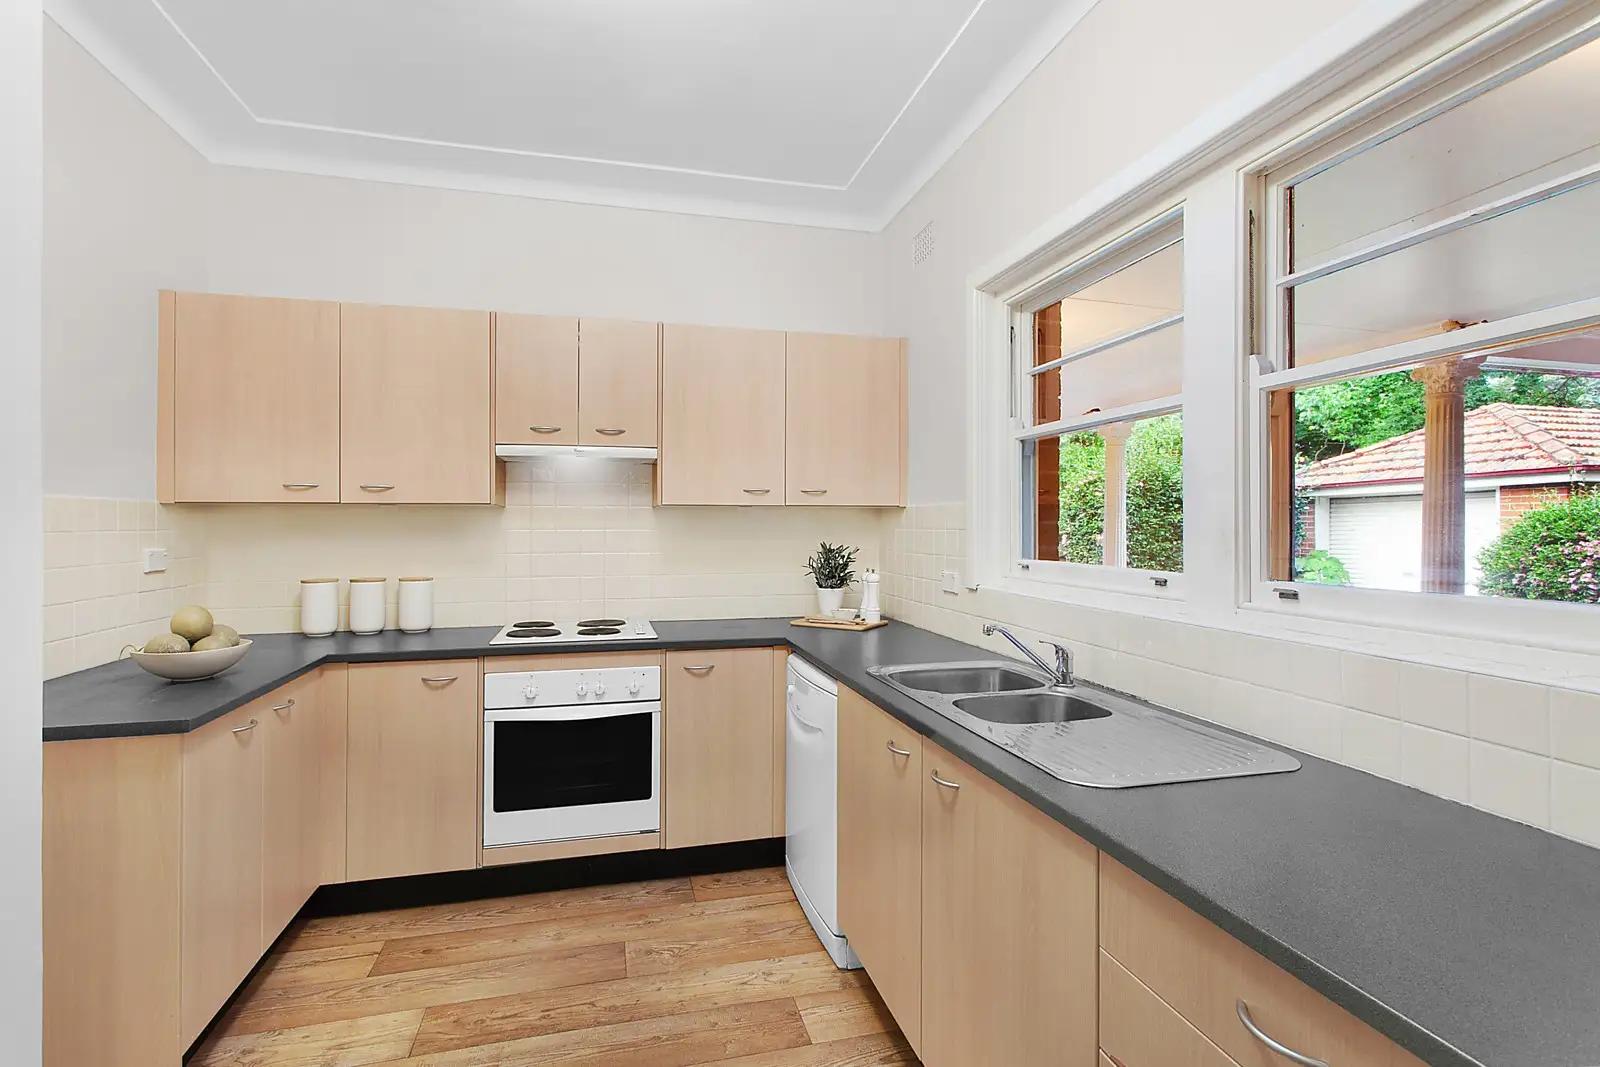 Photo #3: 33 Inverallan Avenue, West Pymble - Sold by Sydney Sotheby's International Realty